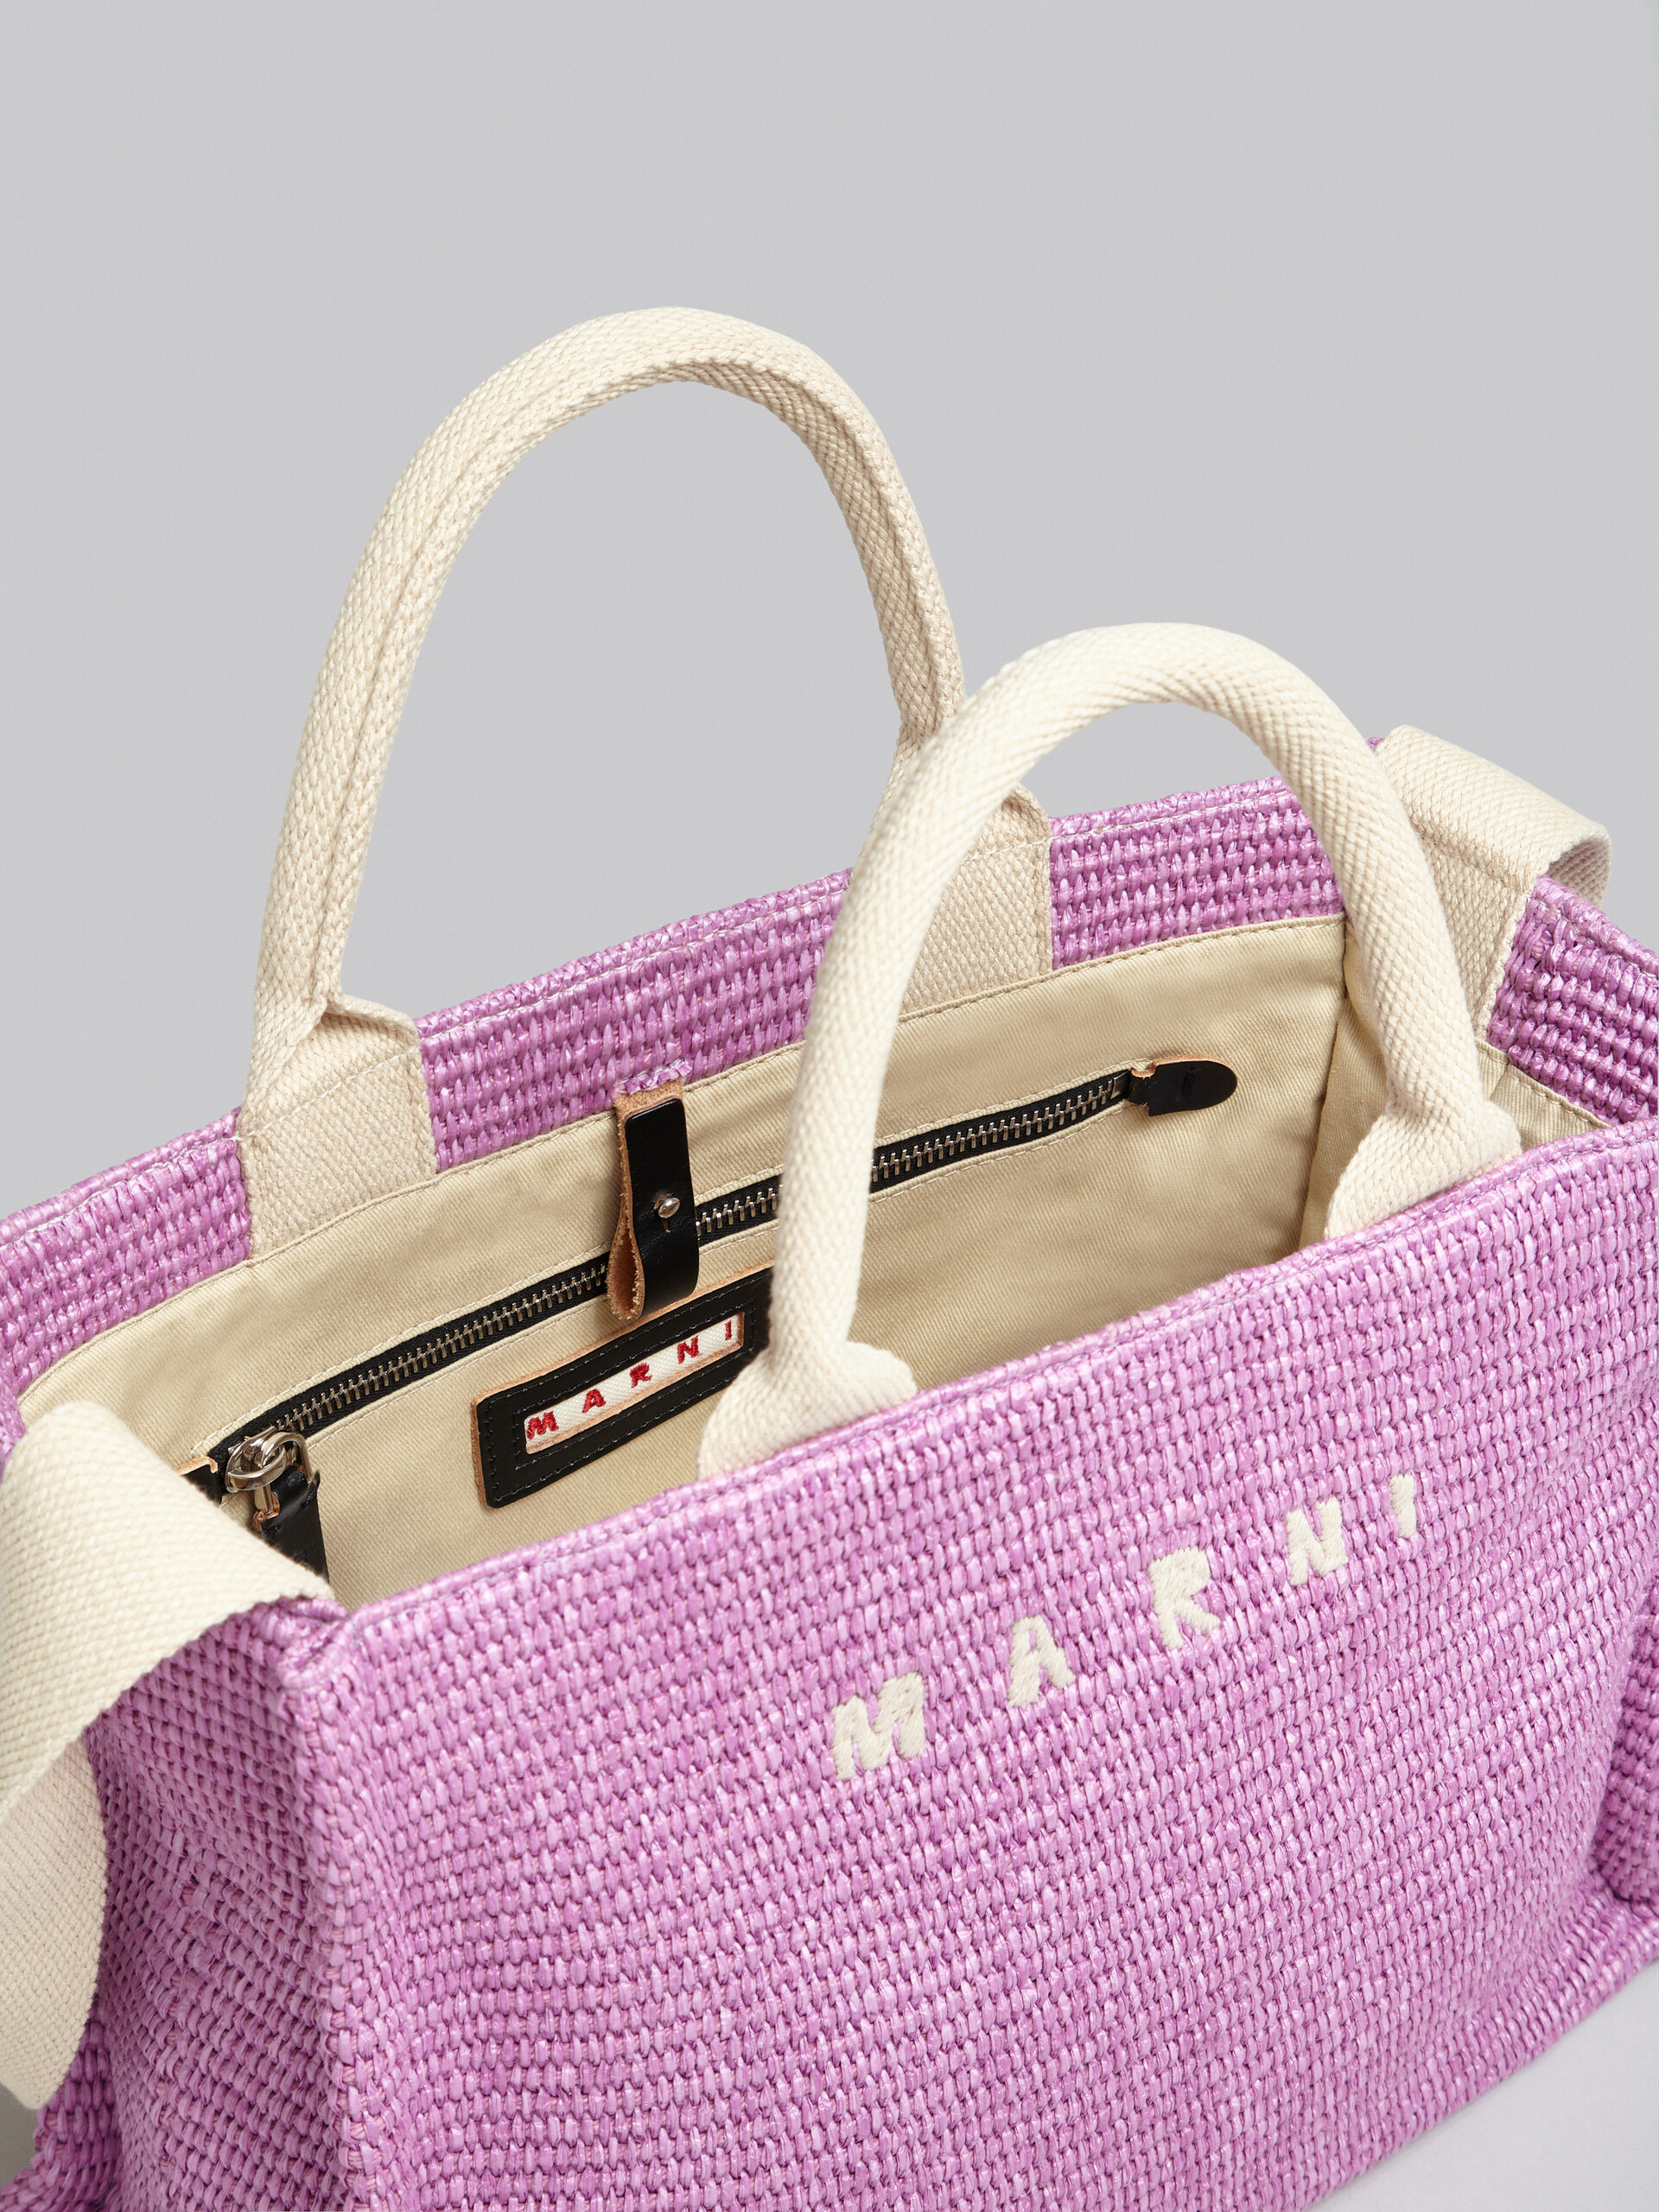 Small Tote in lilac raffia-effect fabric - Shopping Bags - Image 4